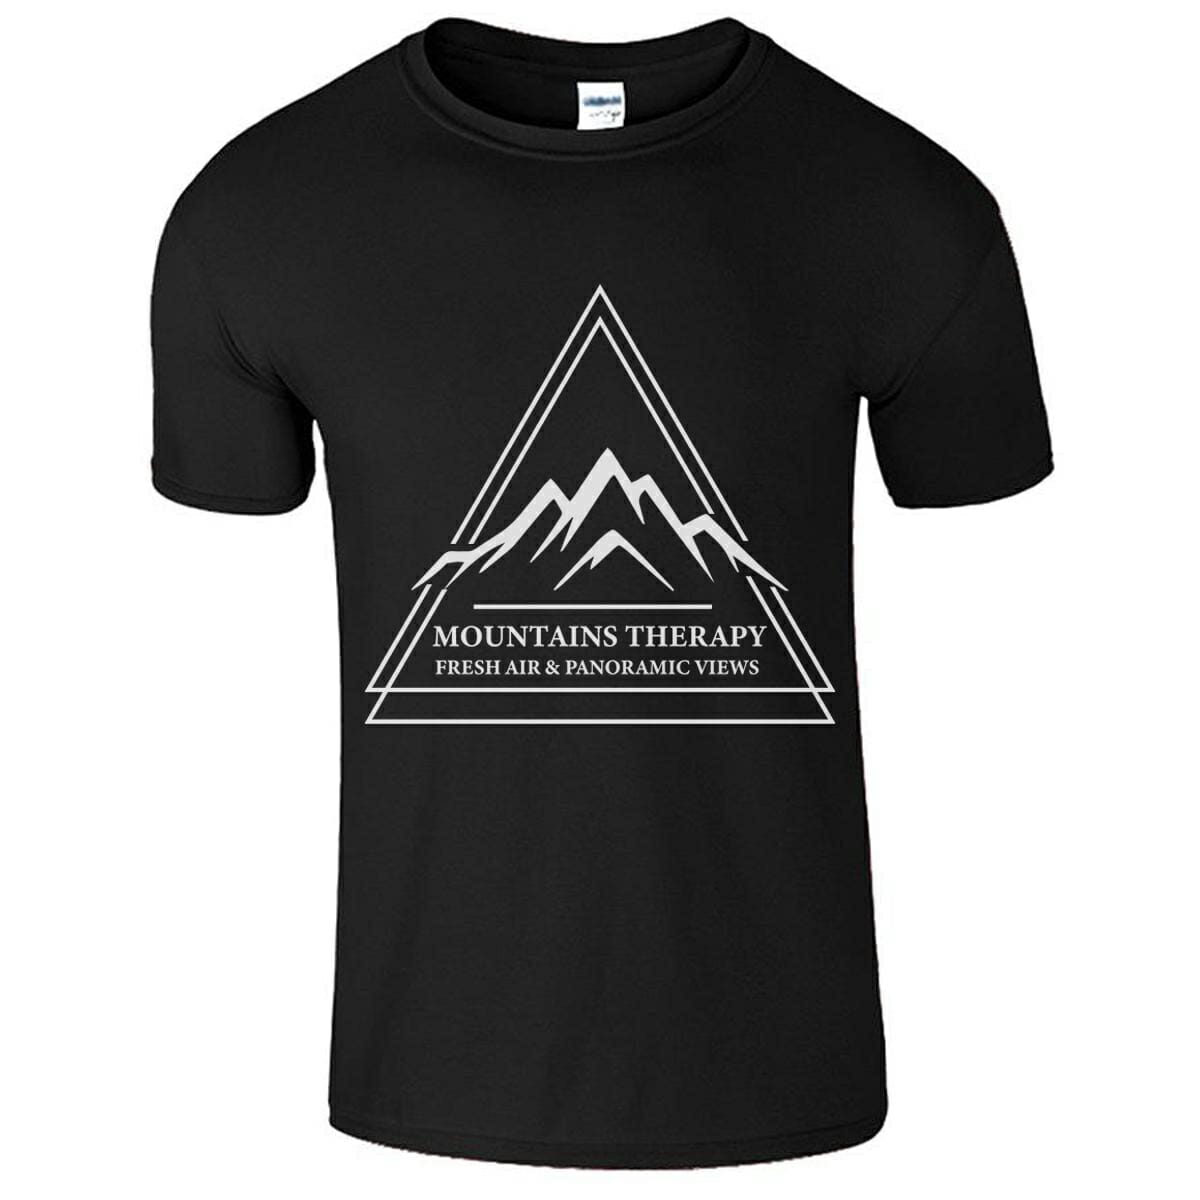 Mountain Therapy Fresh Air & Panoramic Views T-Shirt Design for Hiking